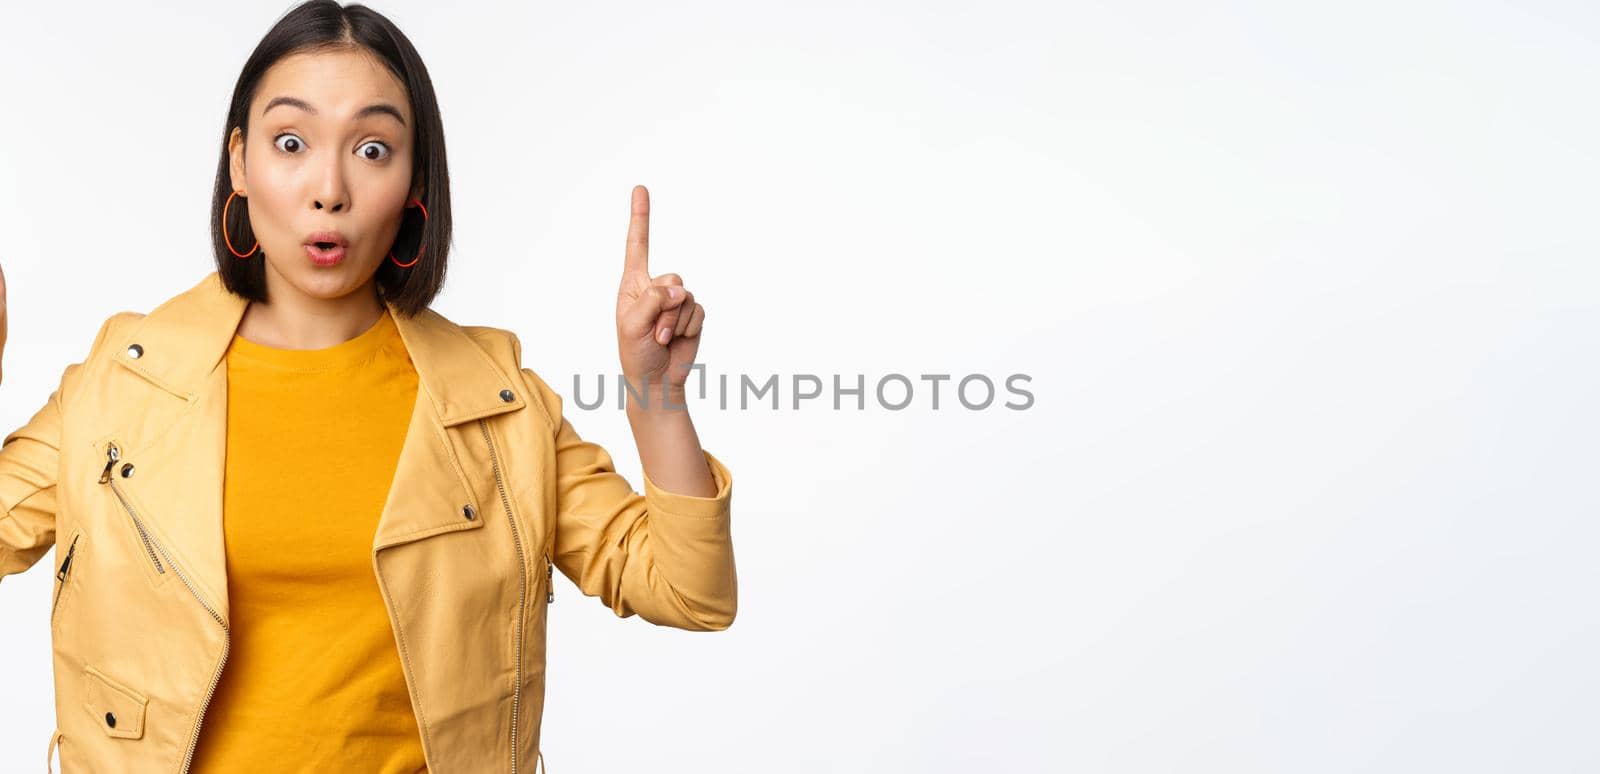 Surprised asian girl pointing fingers up, express interest, showing advertisement ahead, demonstrating promo banner on top, standing against white background.